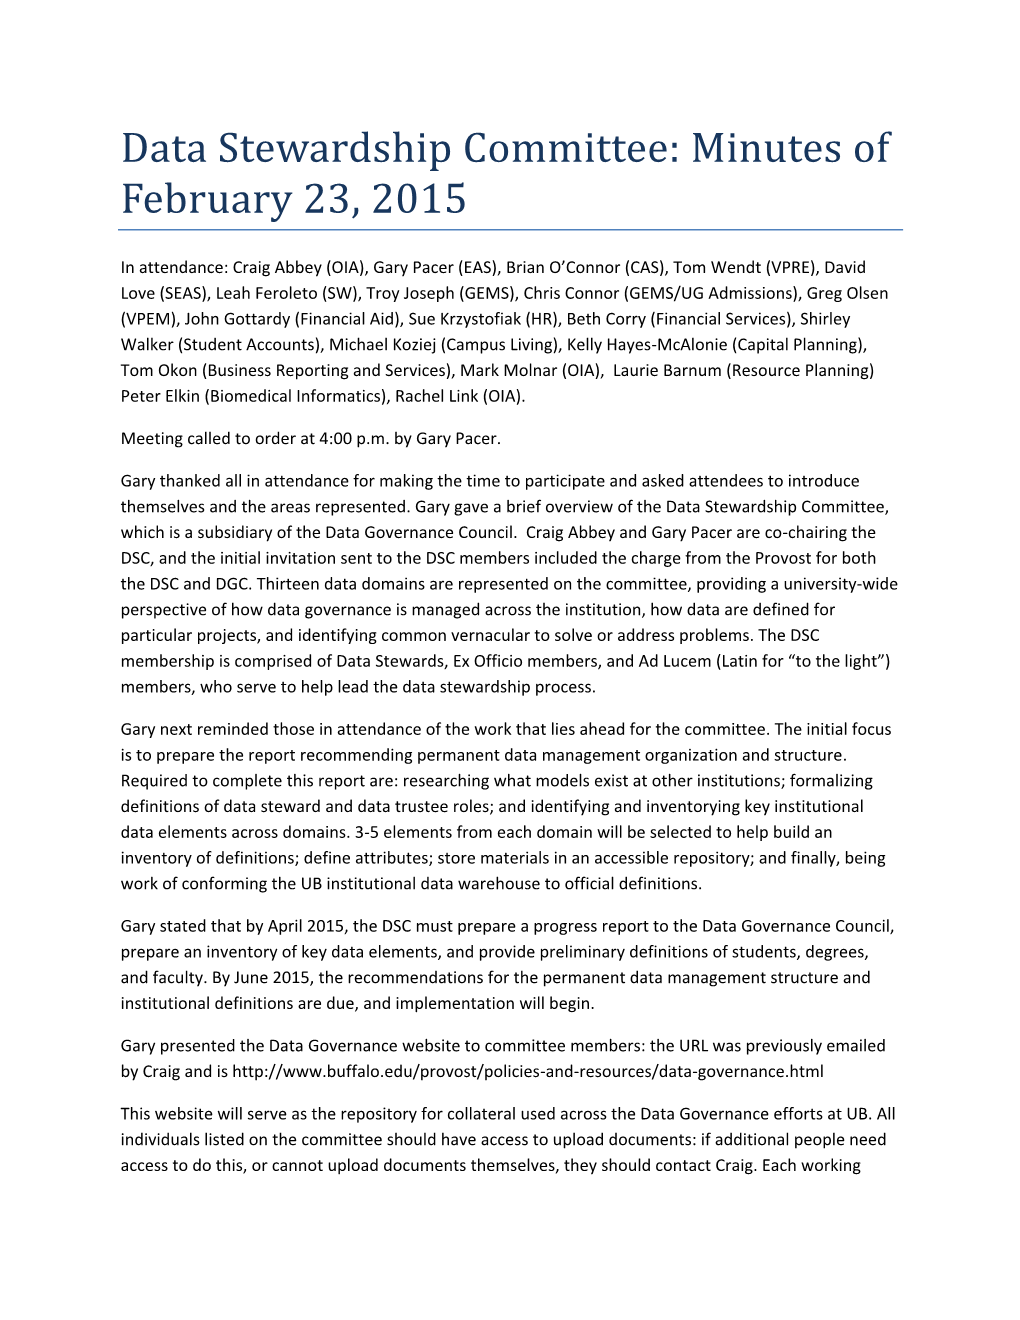 Data Stewardship Committee: Minutes of February 23, 2015